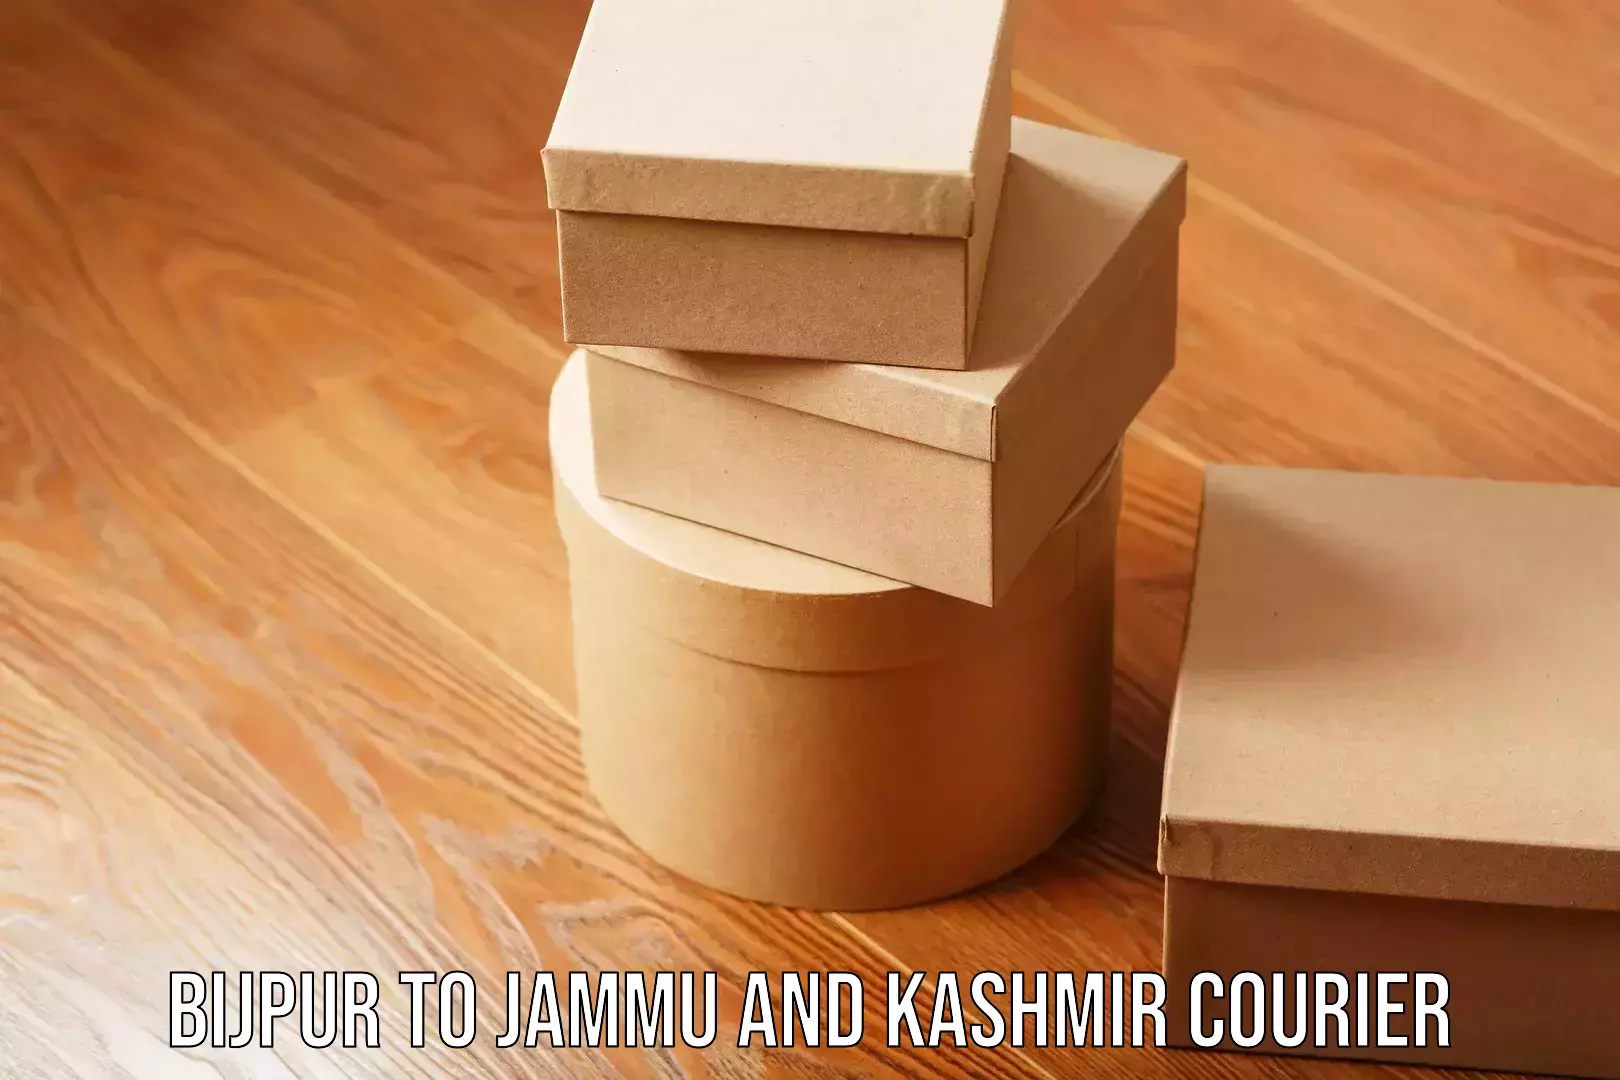 24-hour delivery options Bijpur to Jammu and Kashmir